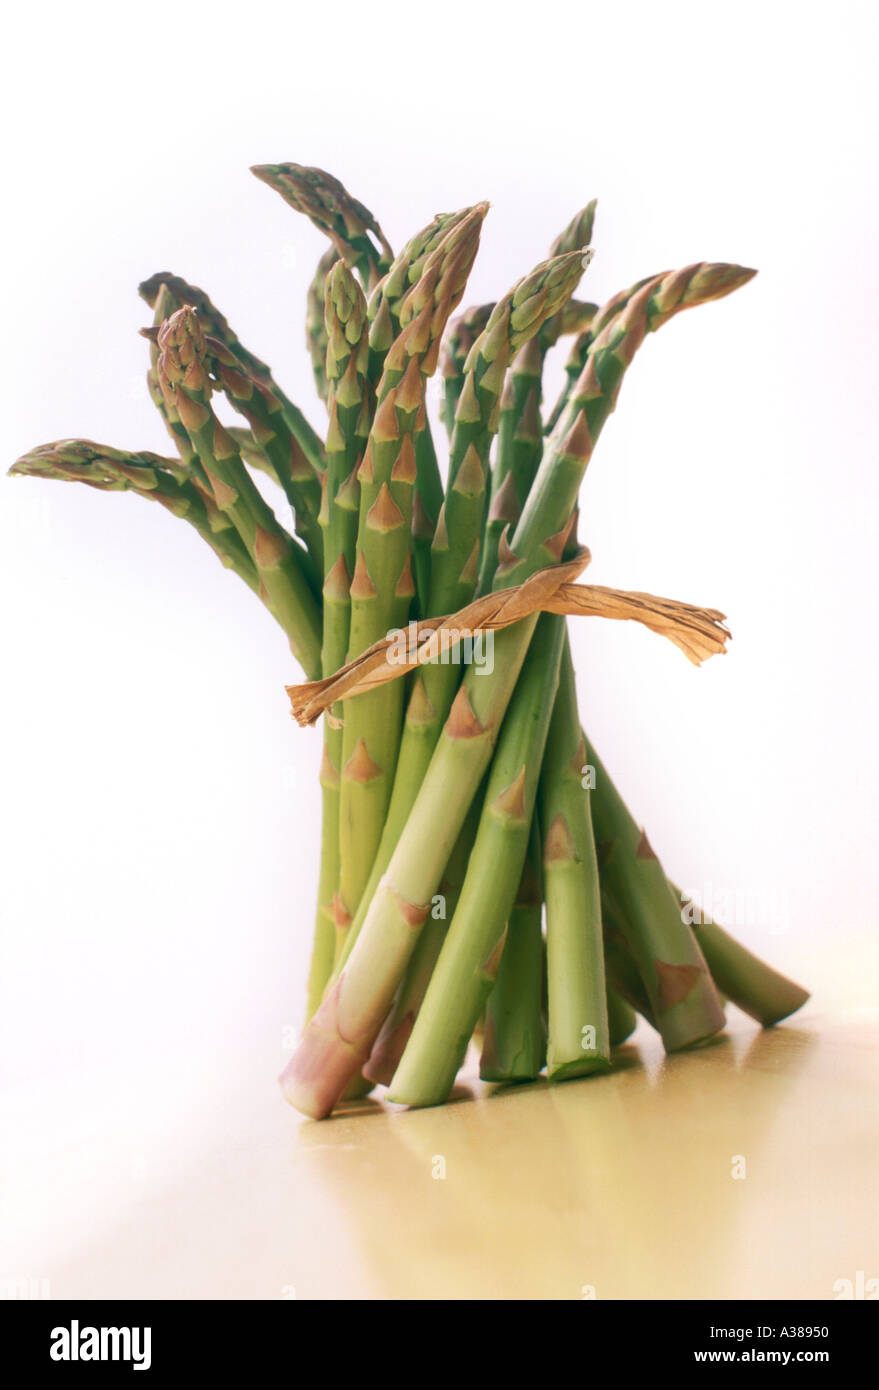 Bunch of asparagus Stock Photo